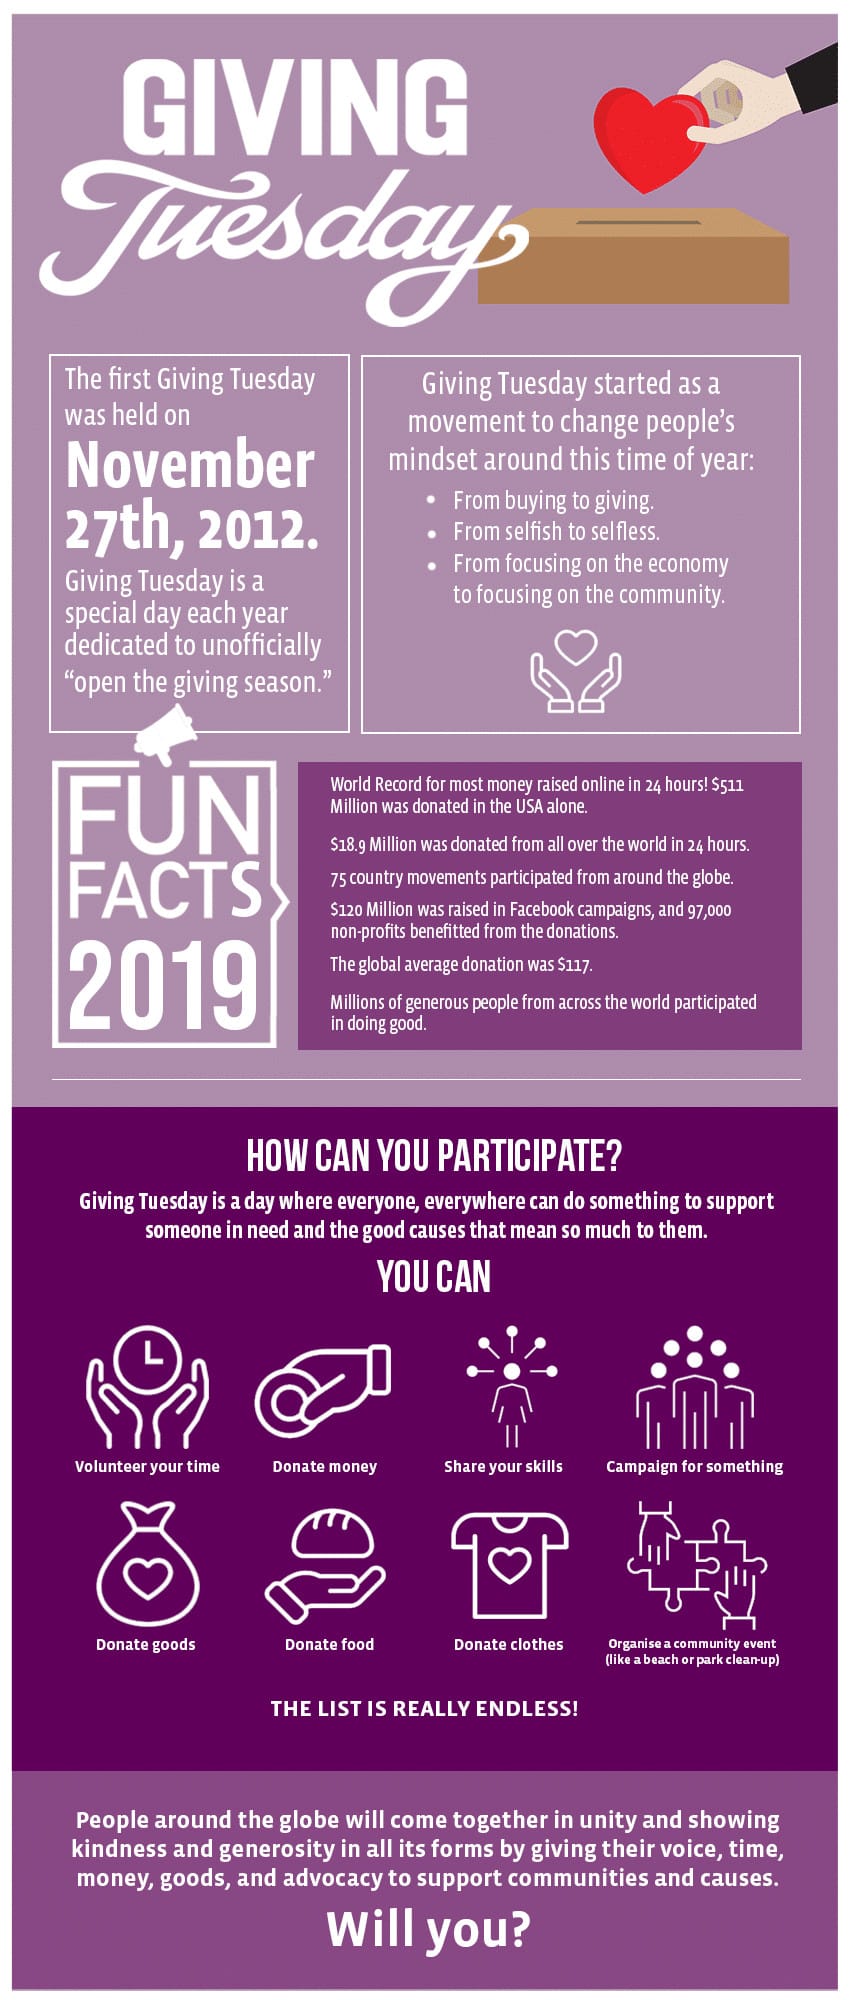 Giving Tuesday 2020 infographic by University of the People